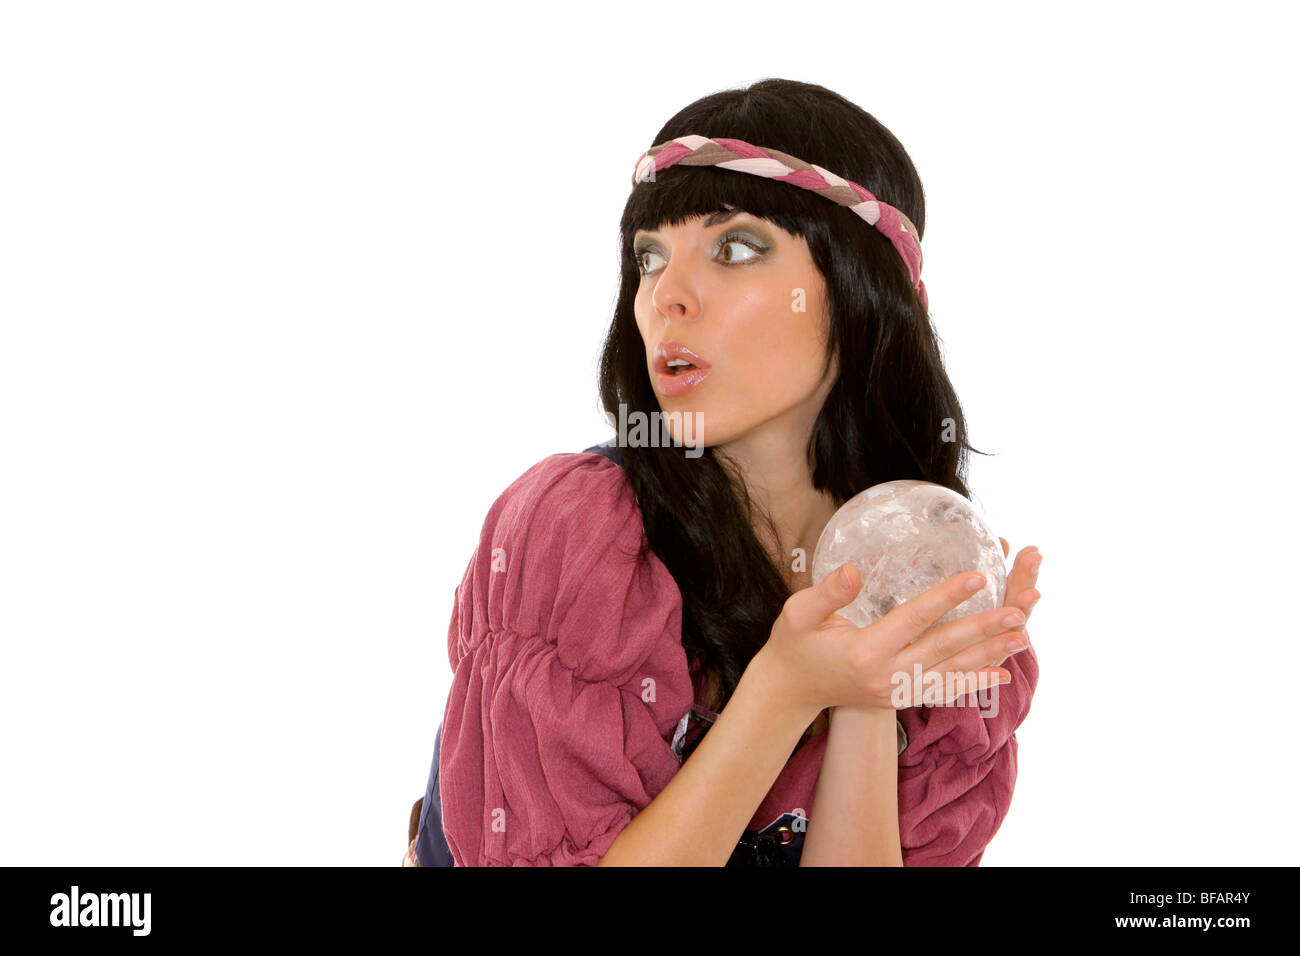 fortune teller with crystal ball Stock Photo